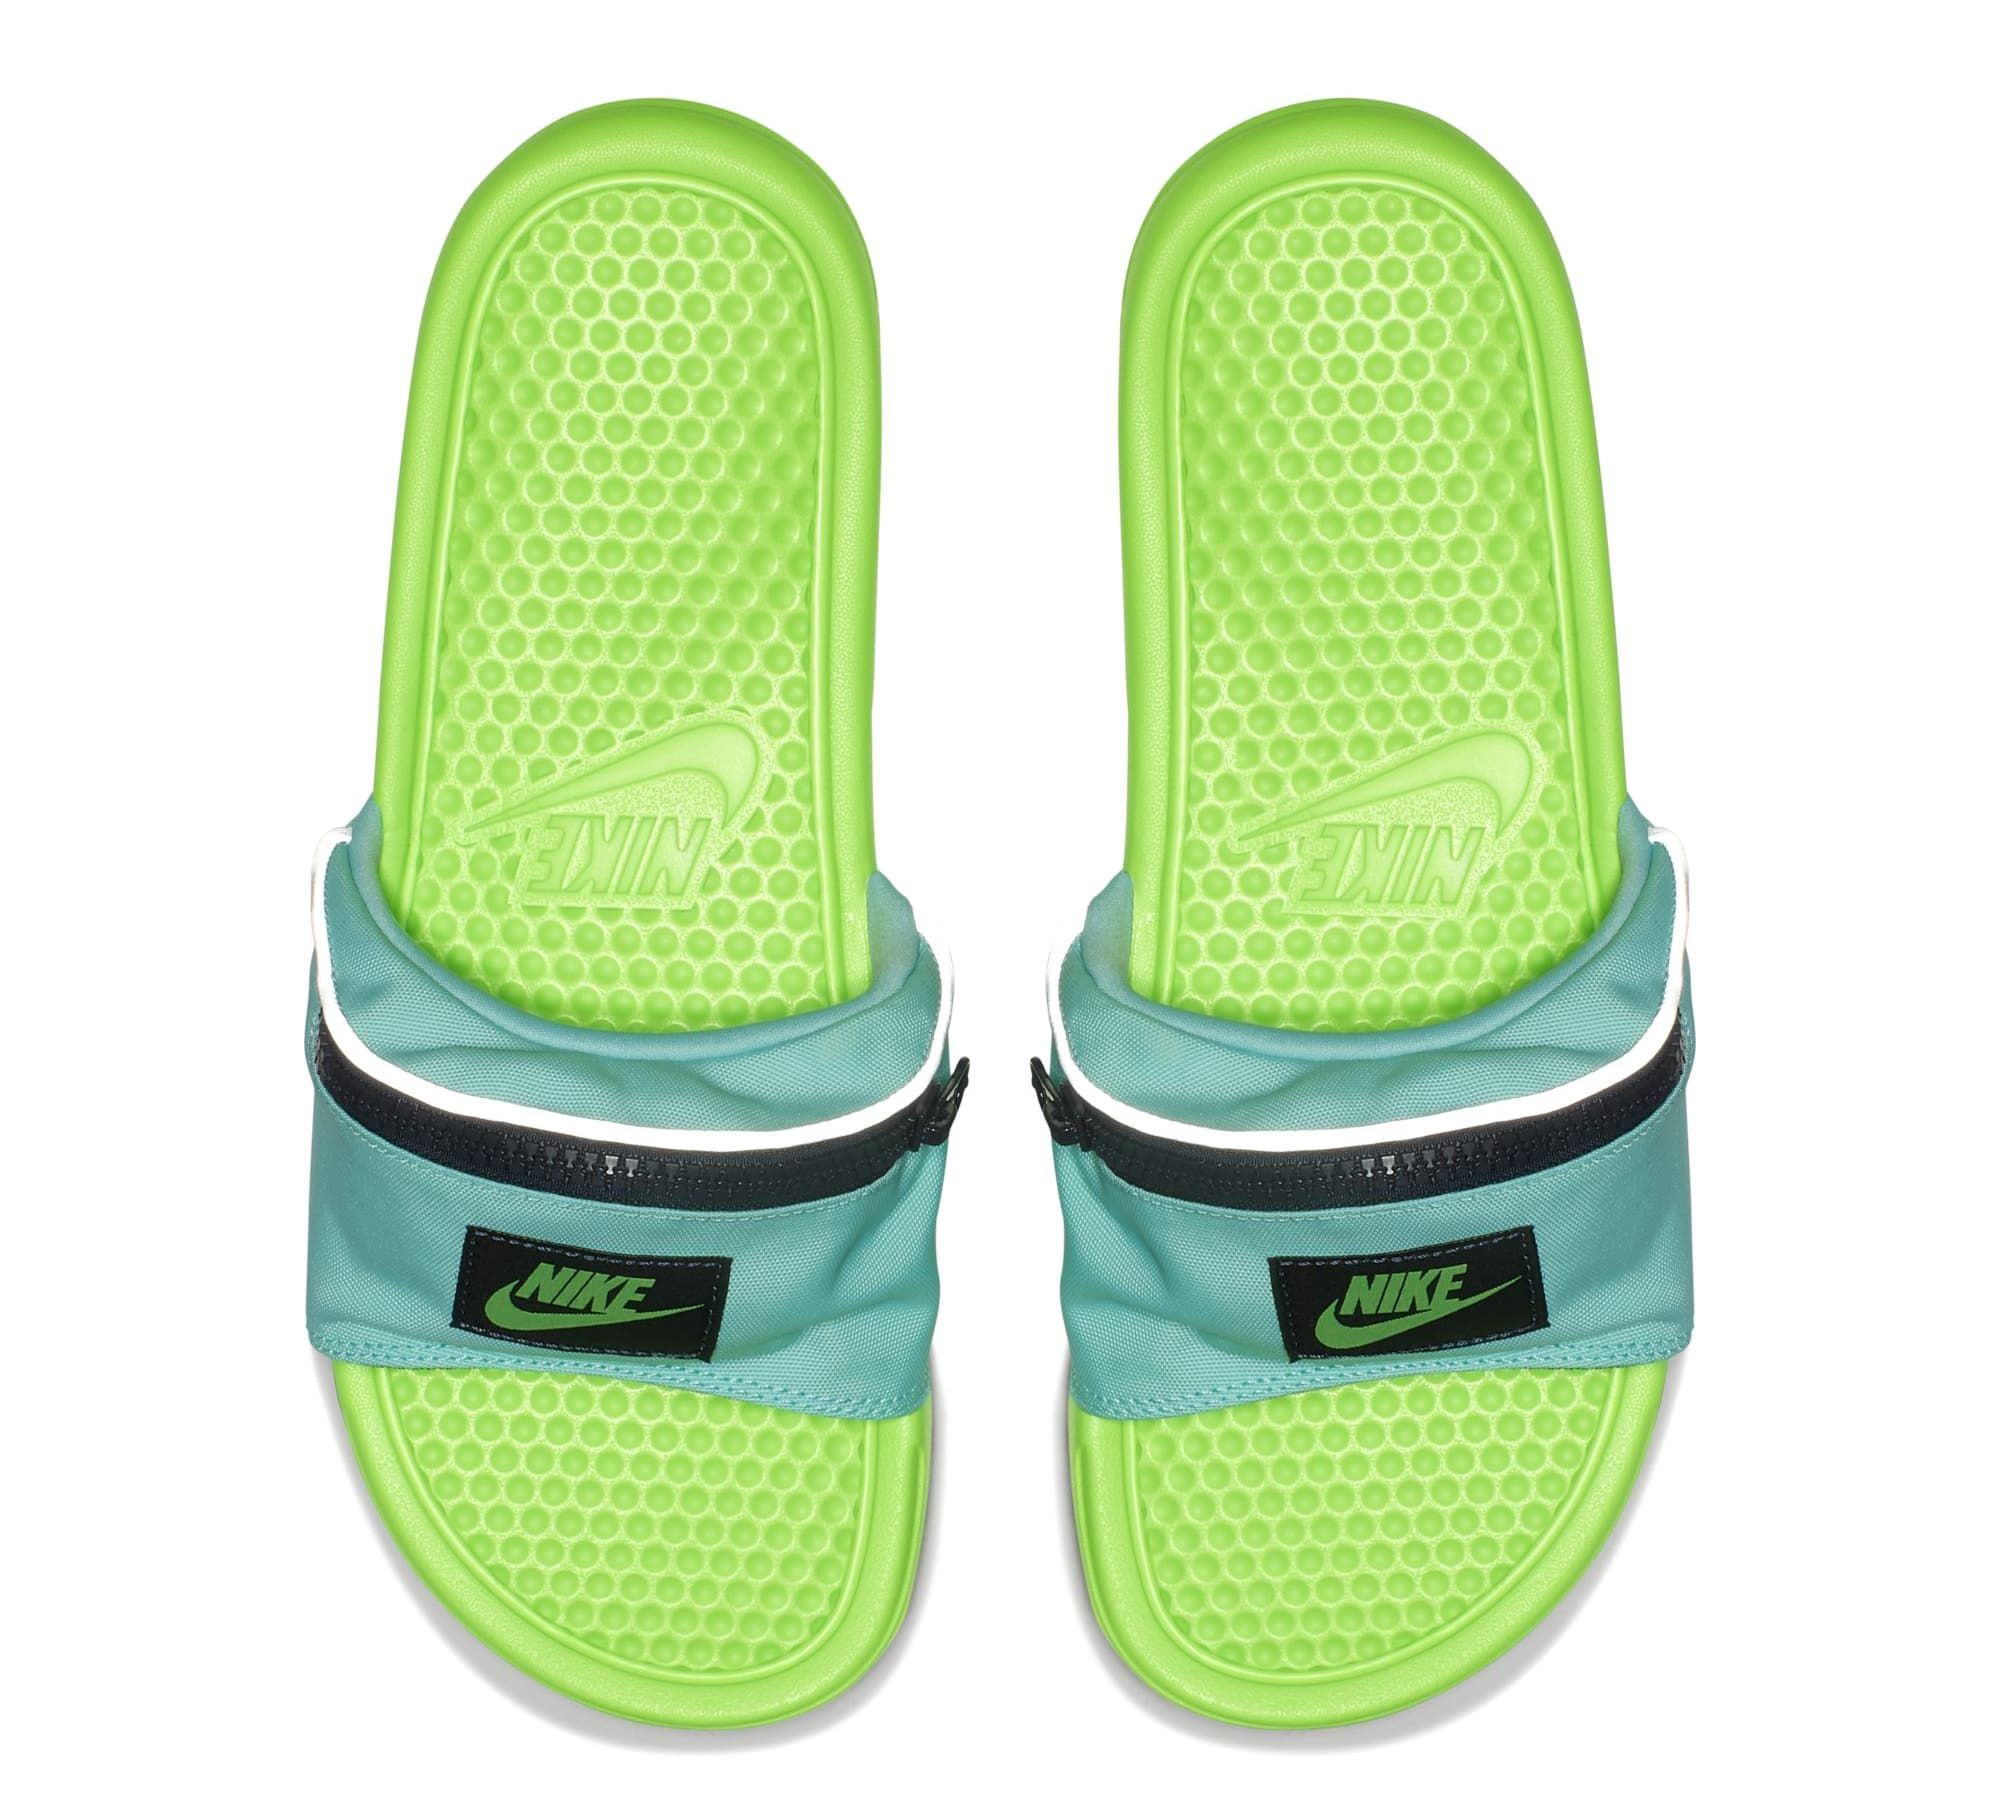 bevind zich lichten attribuut Nike Fanny Pack Slides Are the Best Summer Sandals a Man Could Ask For